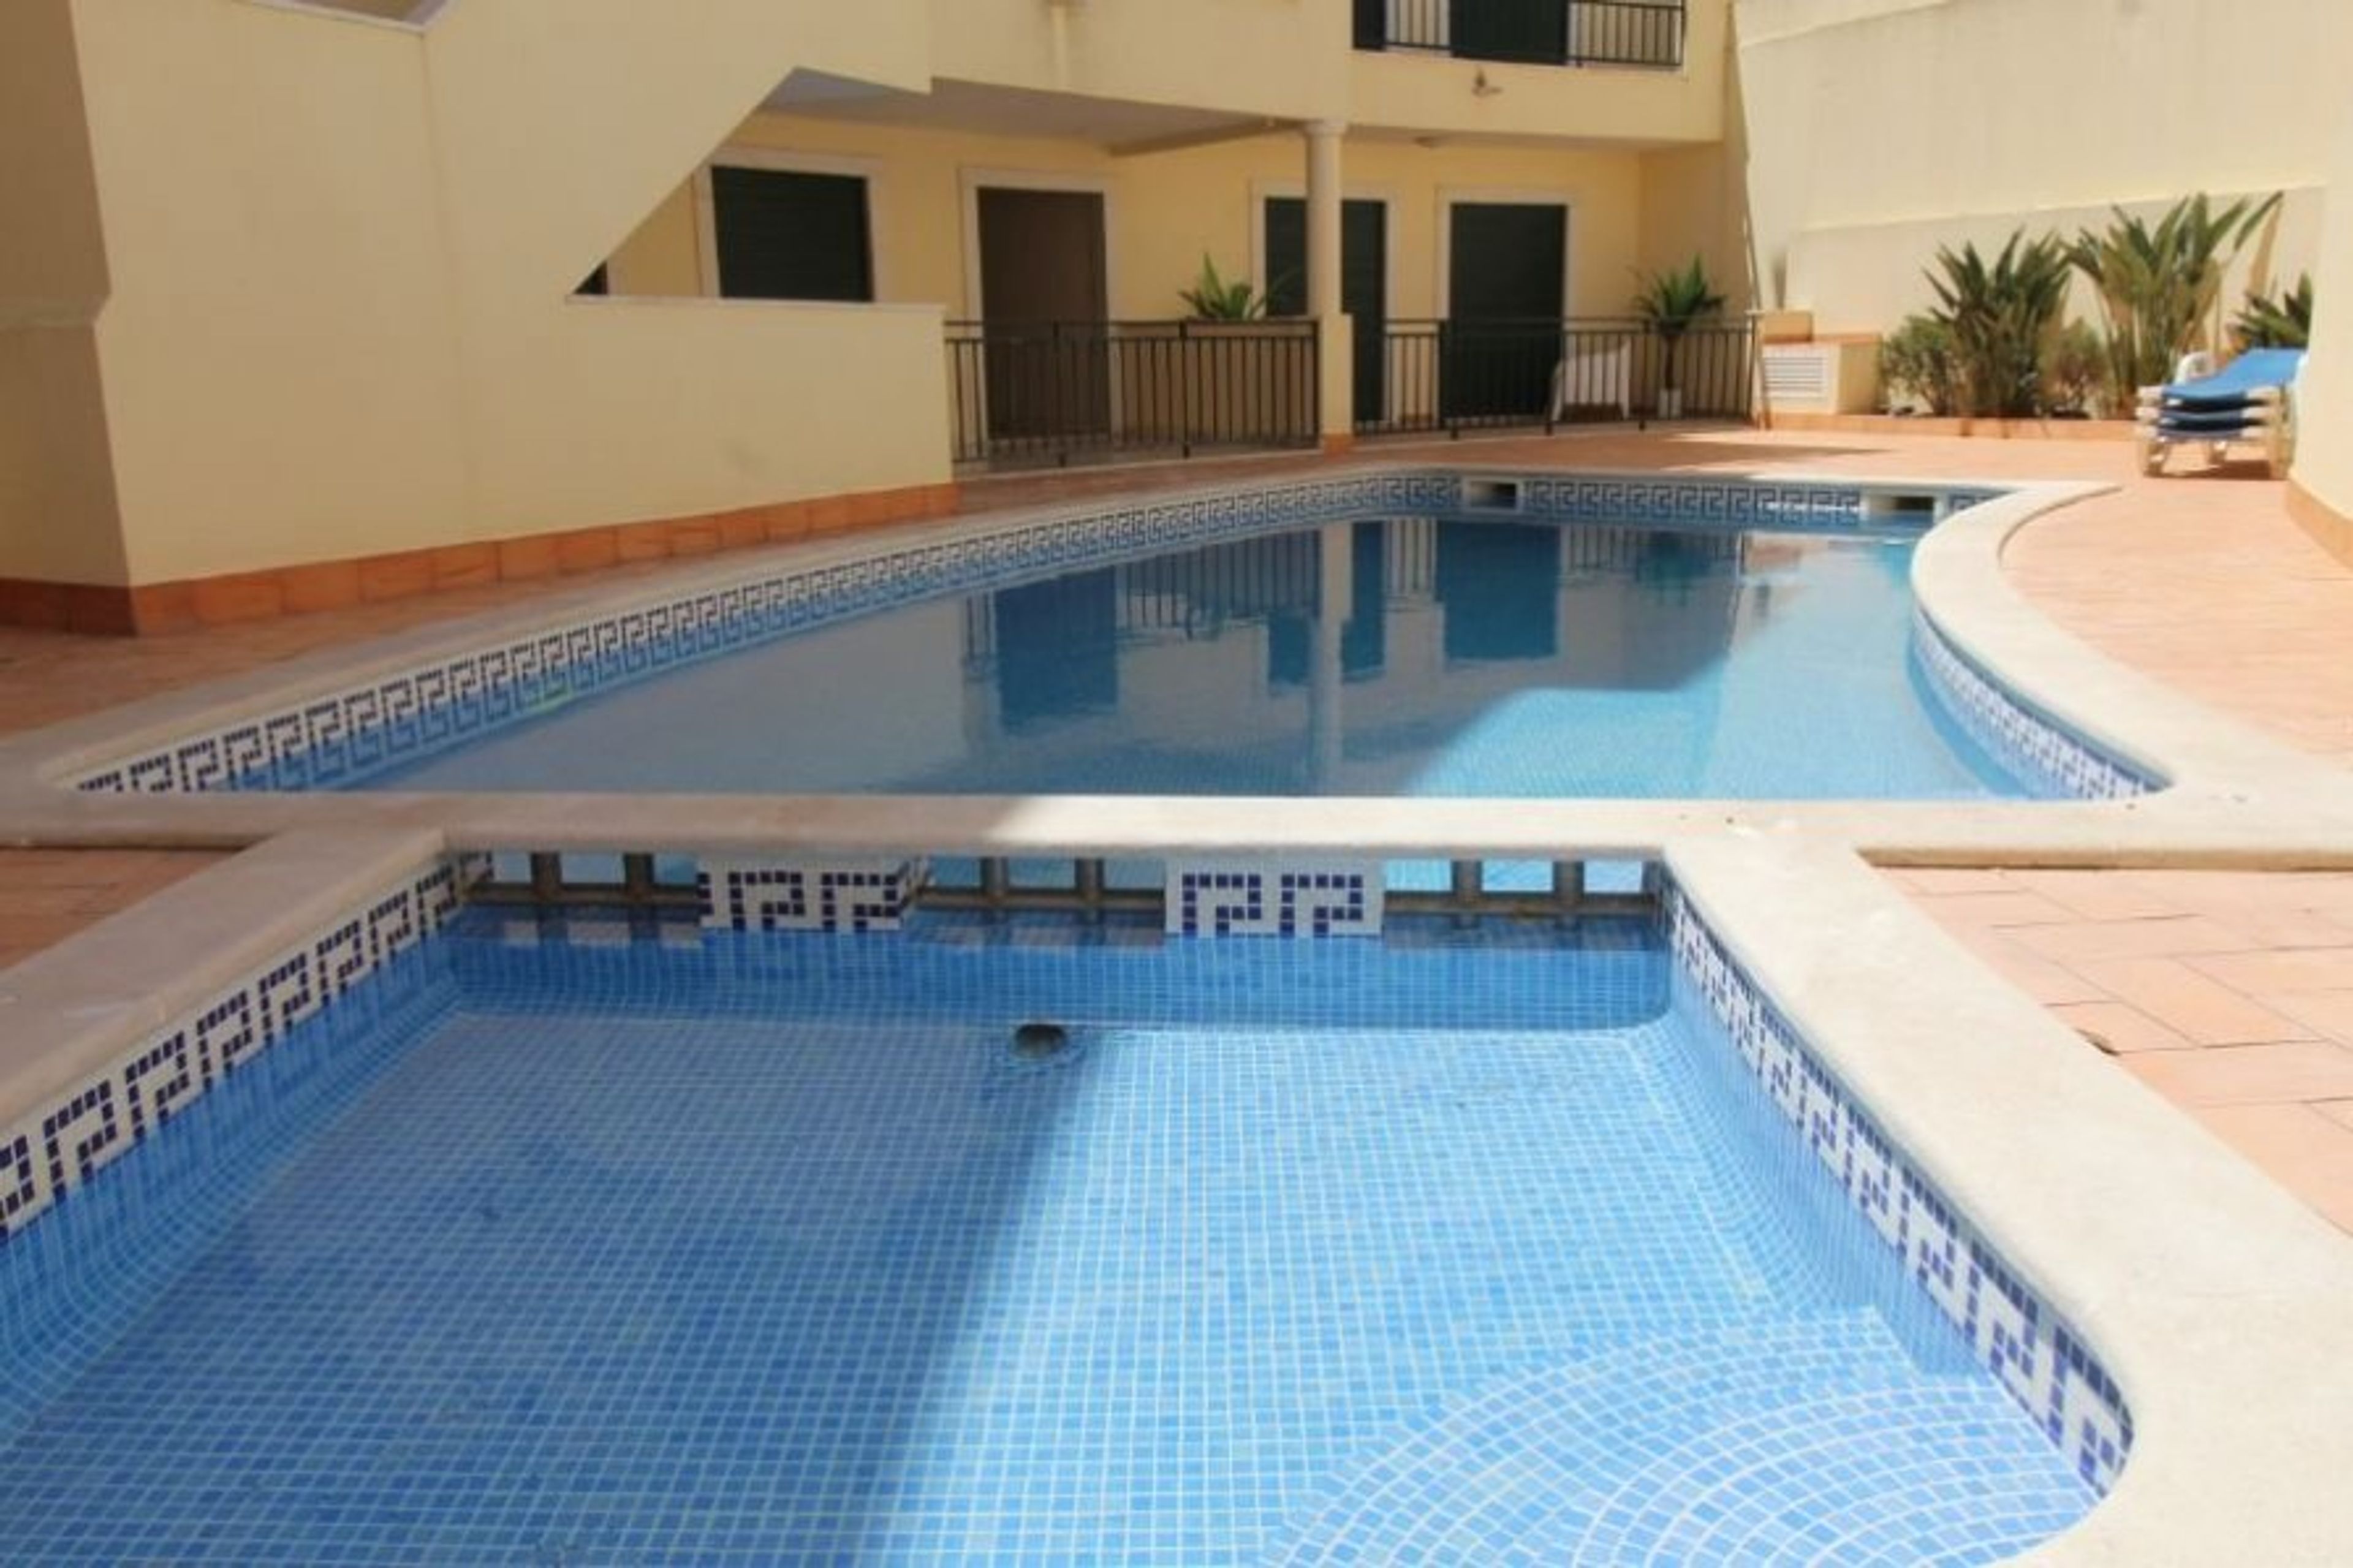 Shared pools with surrounding terrace